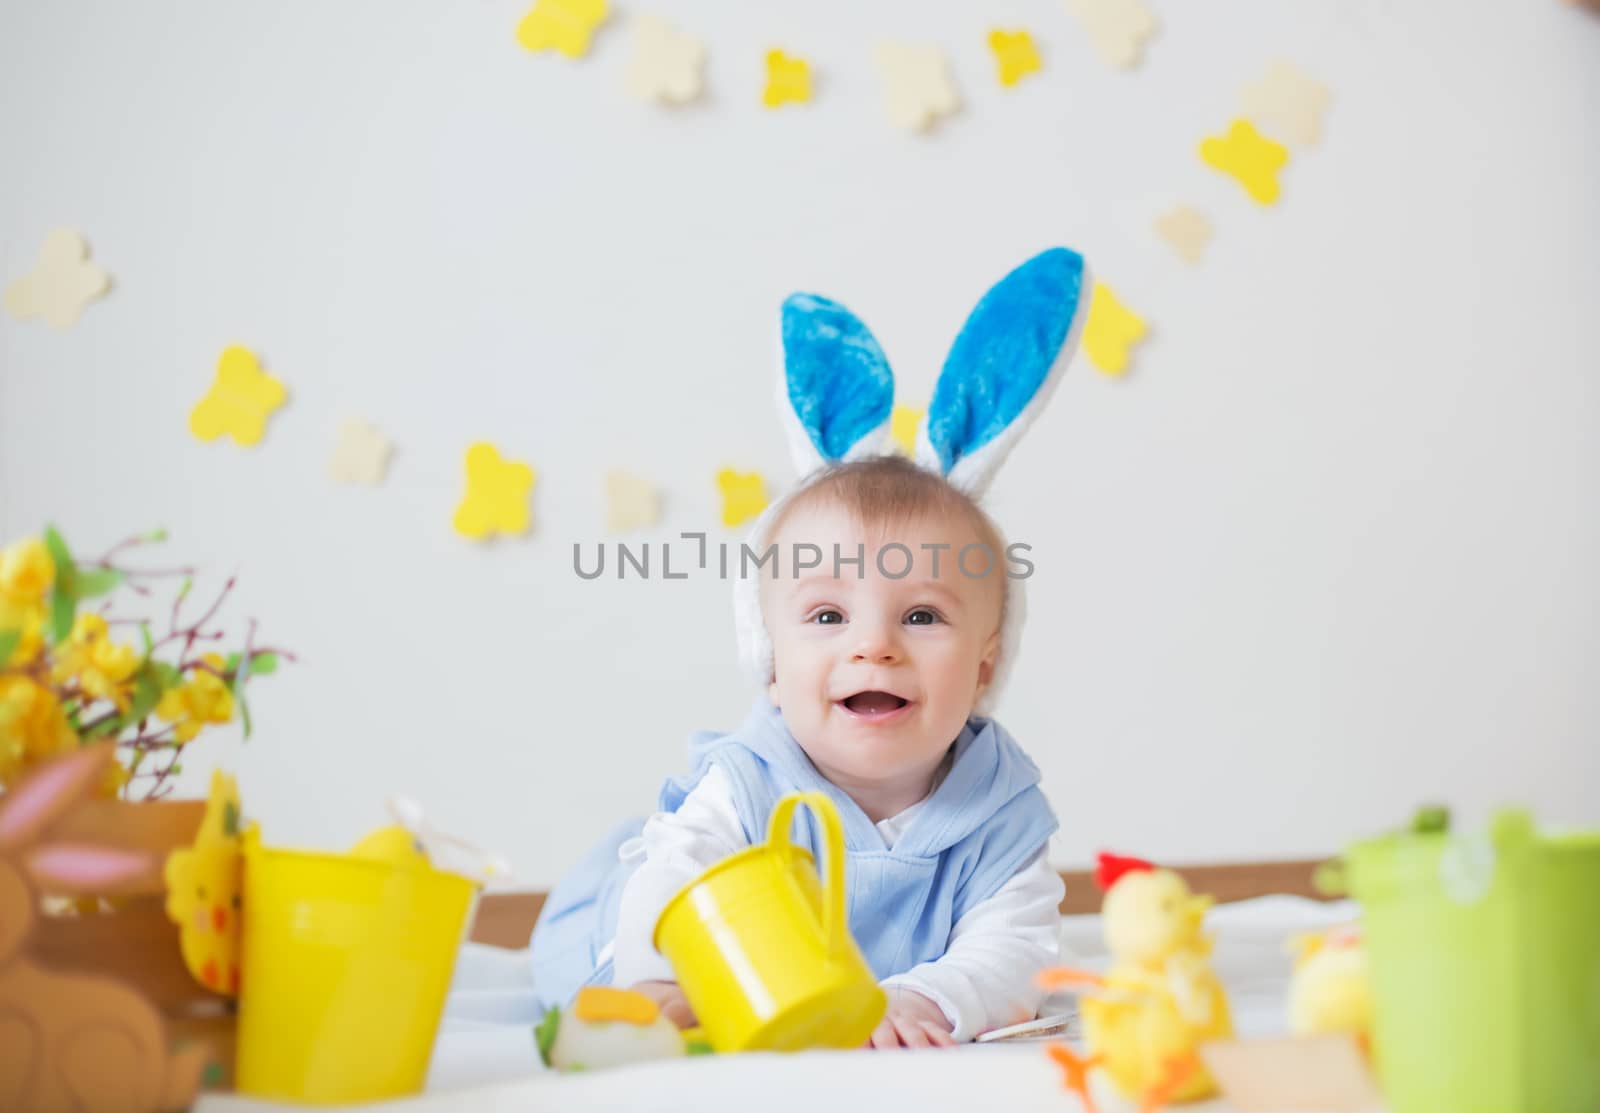 Baby boy with Easter bunny ears and colorful eggs and flowers